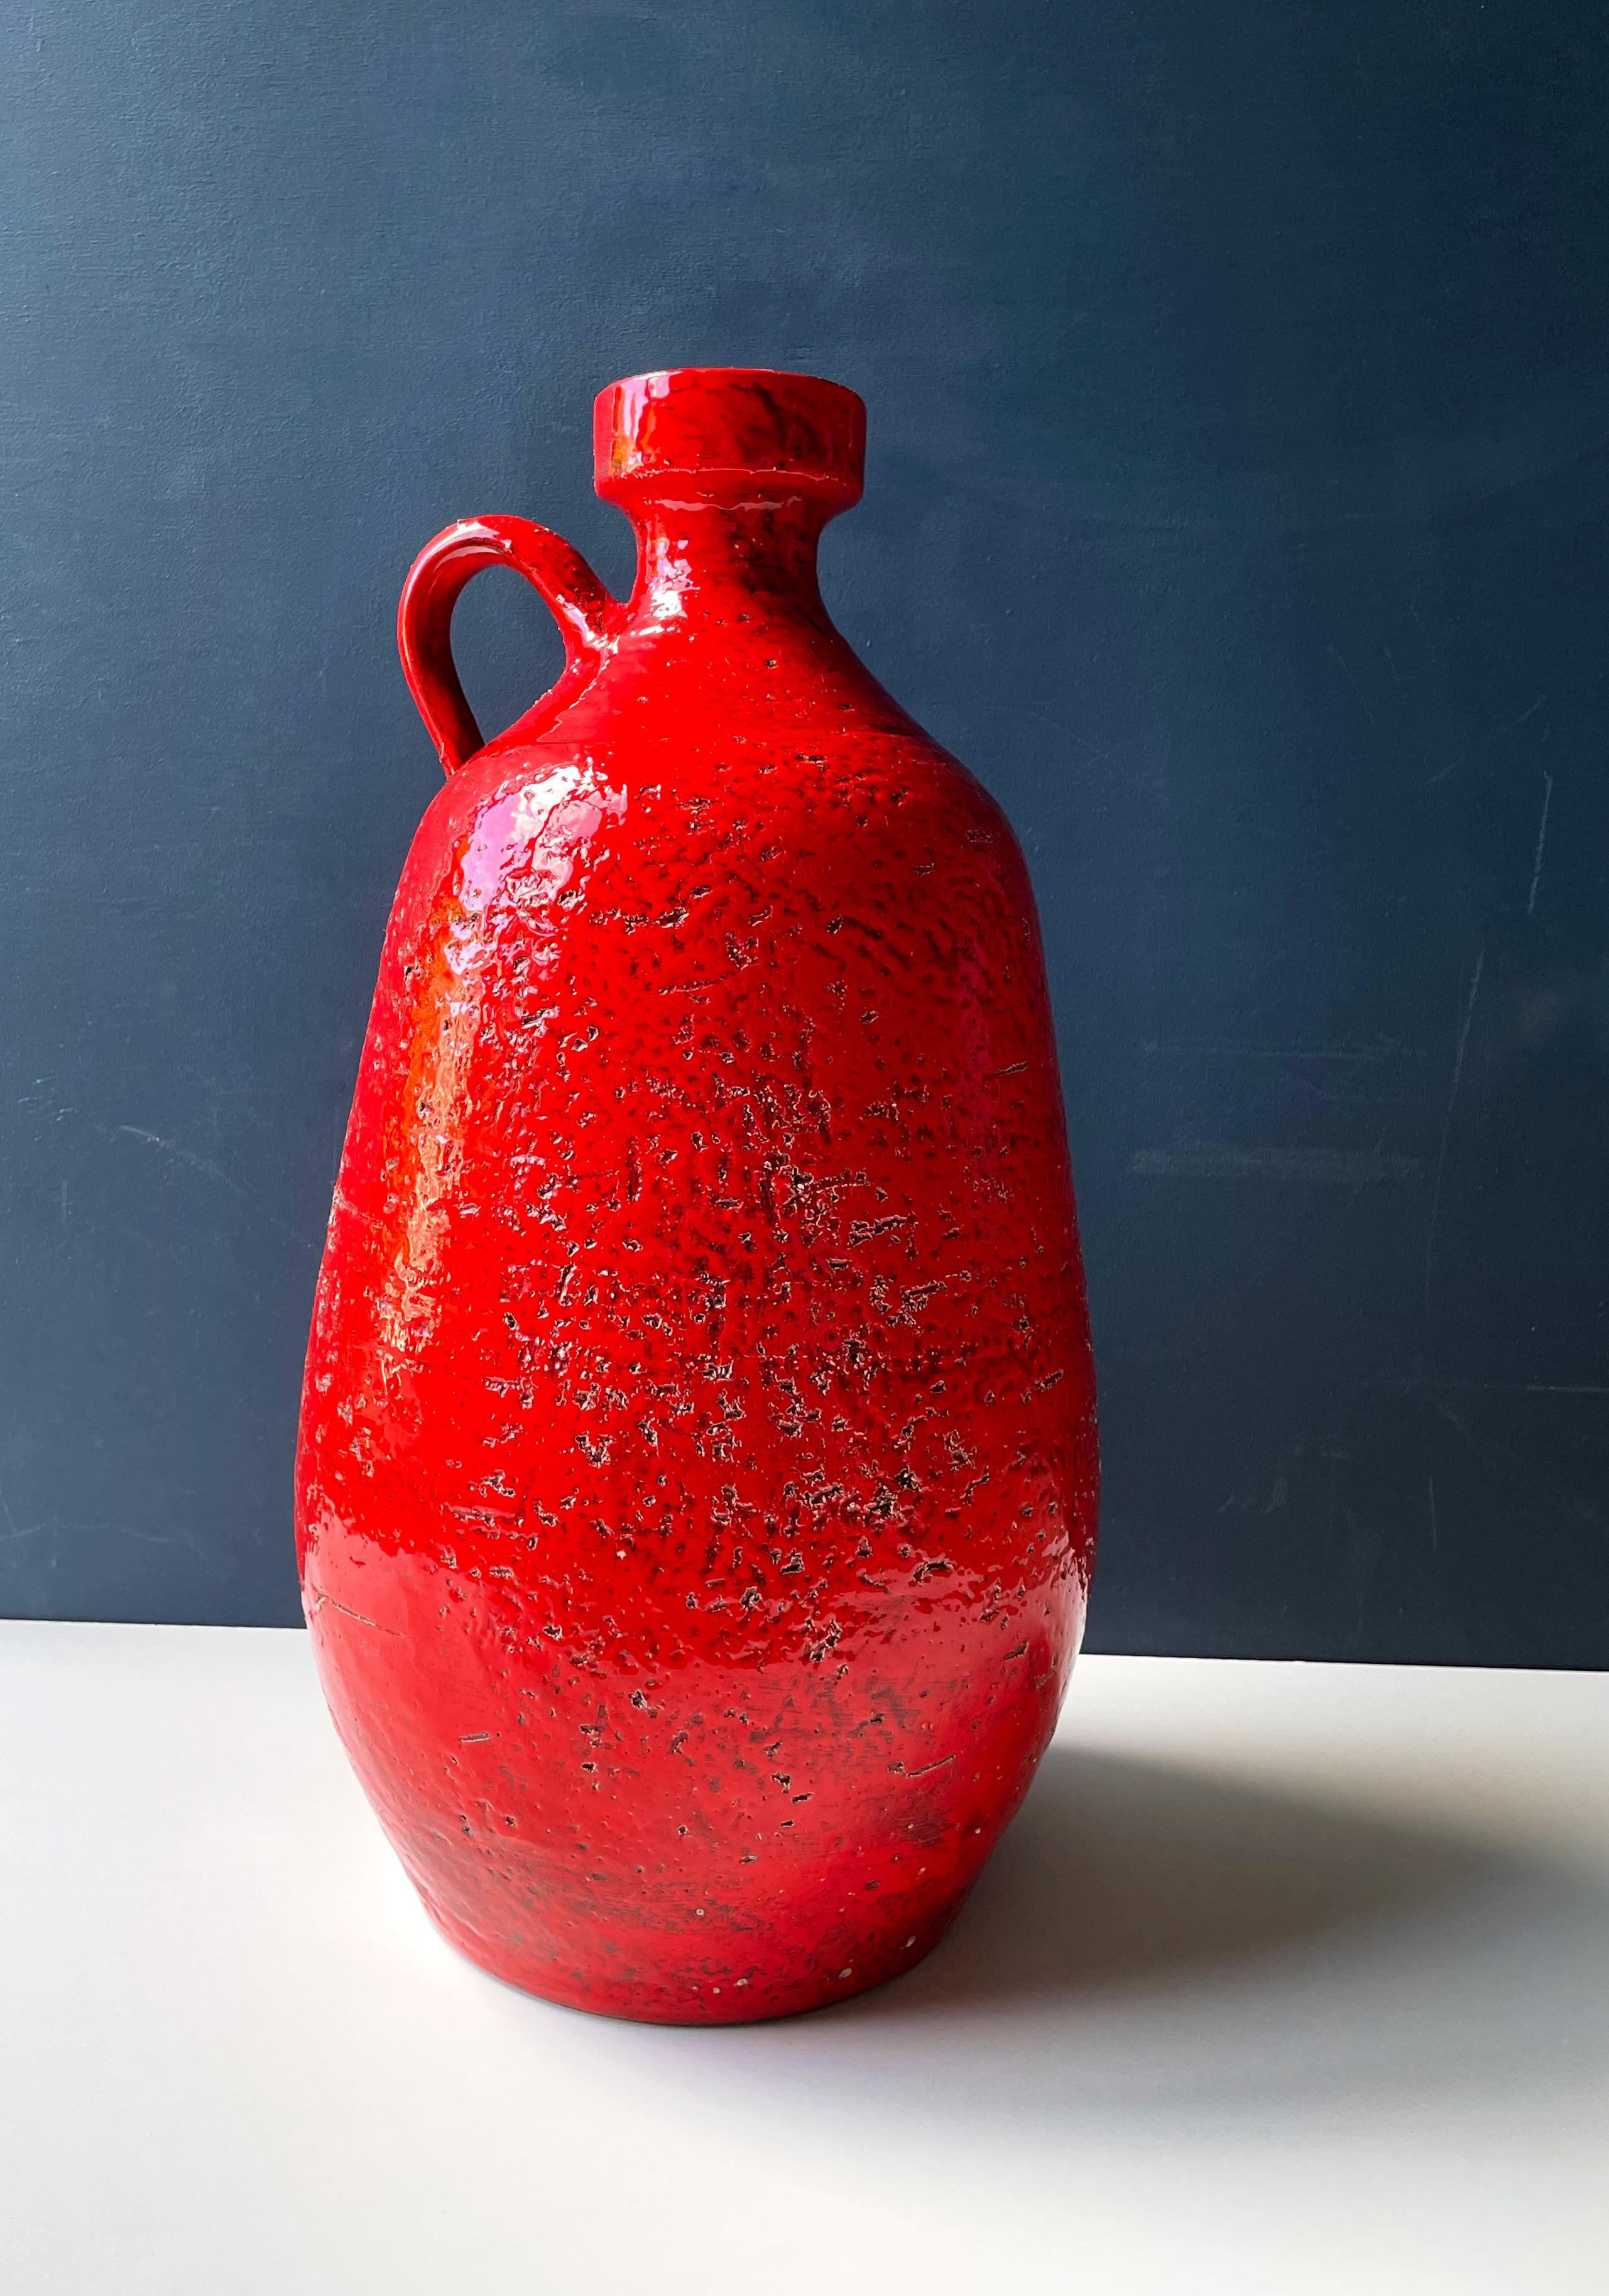 Vintage European monumental bottle pitcher shaped stoneware midcentury floor vase. Handcrafted in rustic chamotte clay with bright shiny red from top to bottom and black glaze on the inside with a small yellow glazed line separating the two colors.